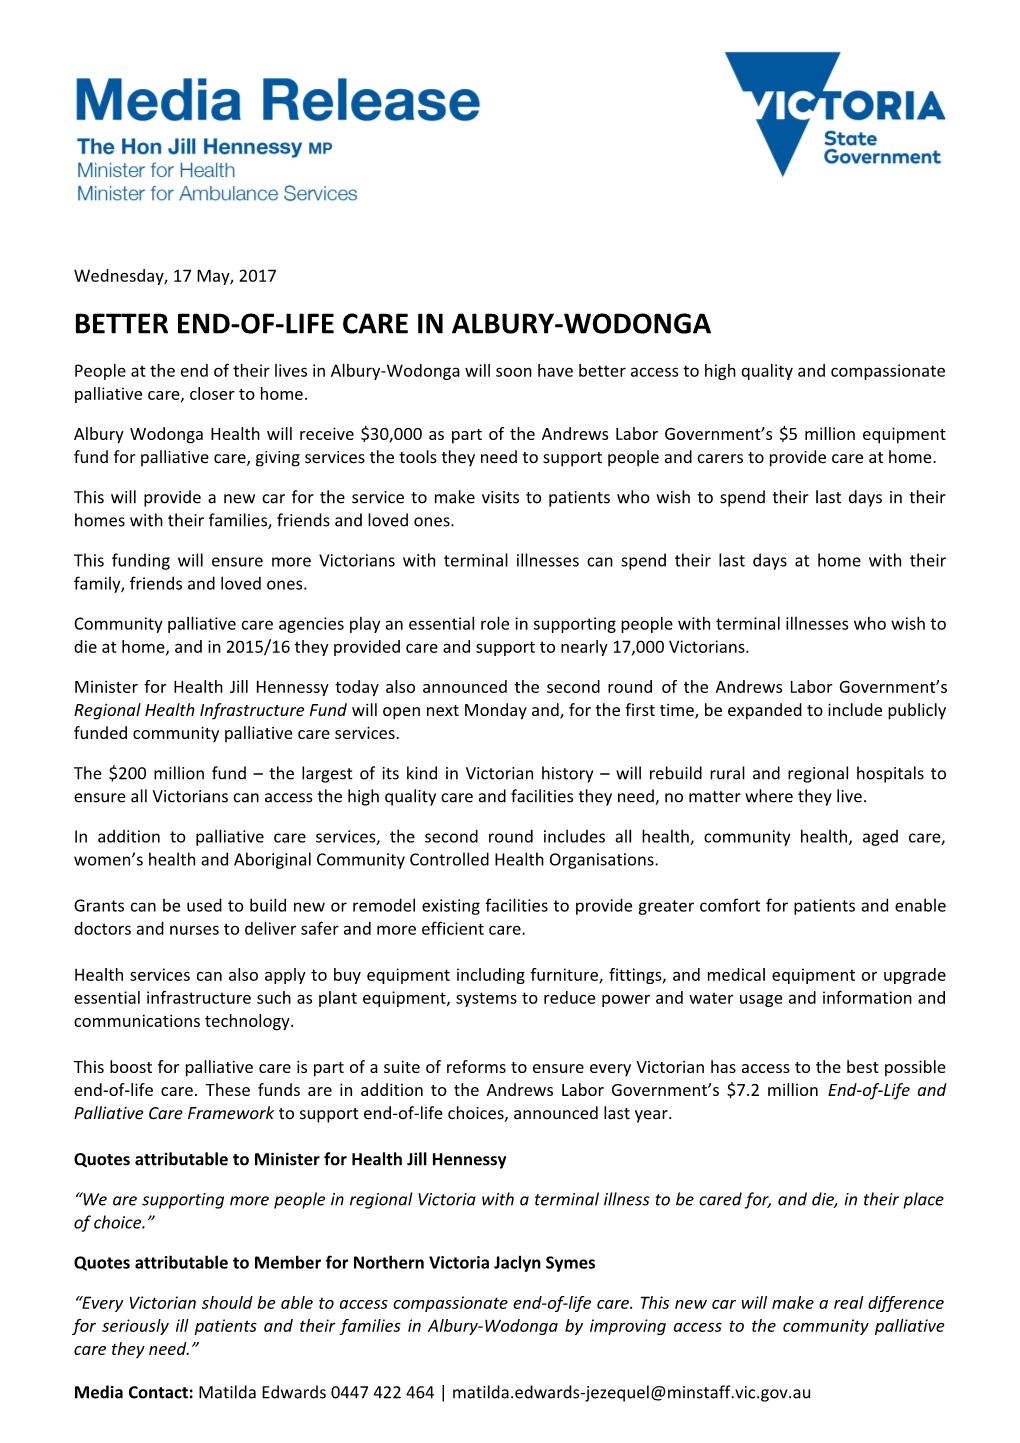 Better End-Of-Life Care in Albury-Wodonga